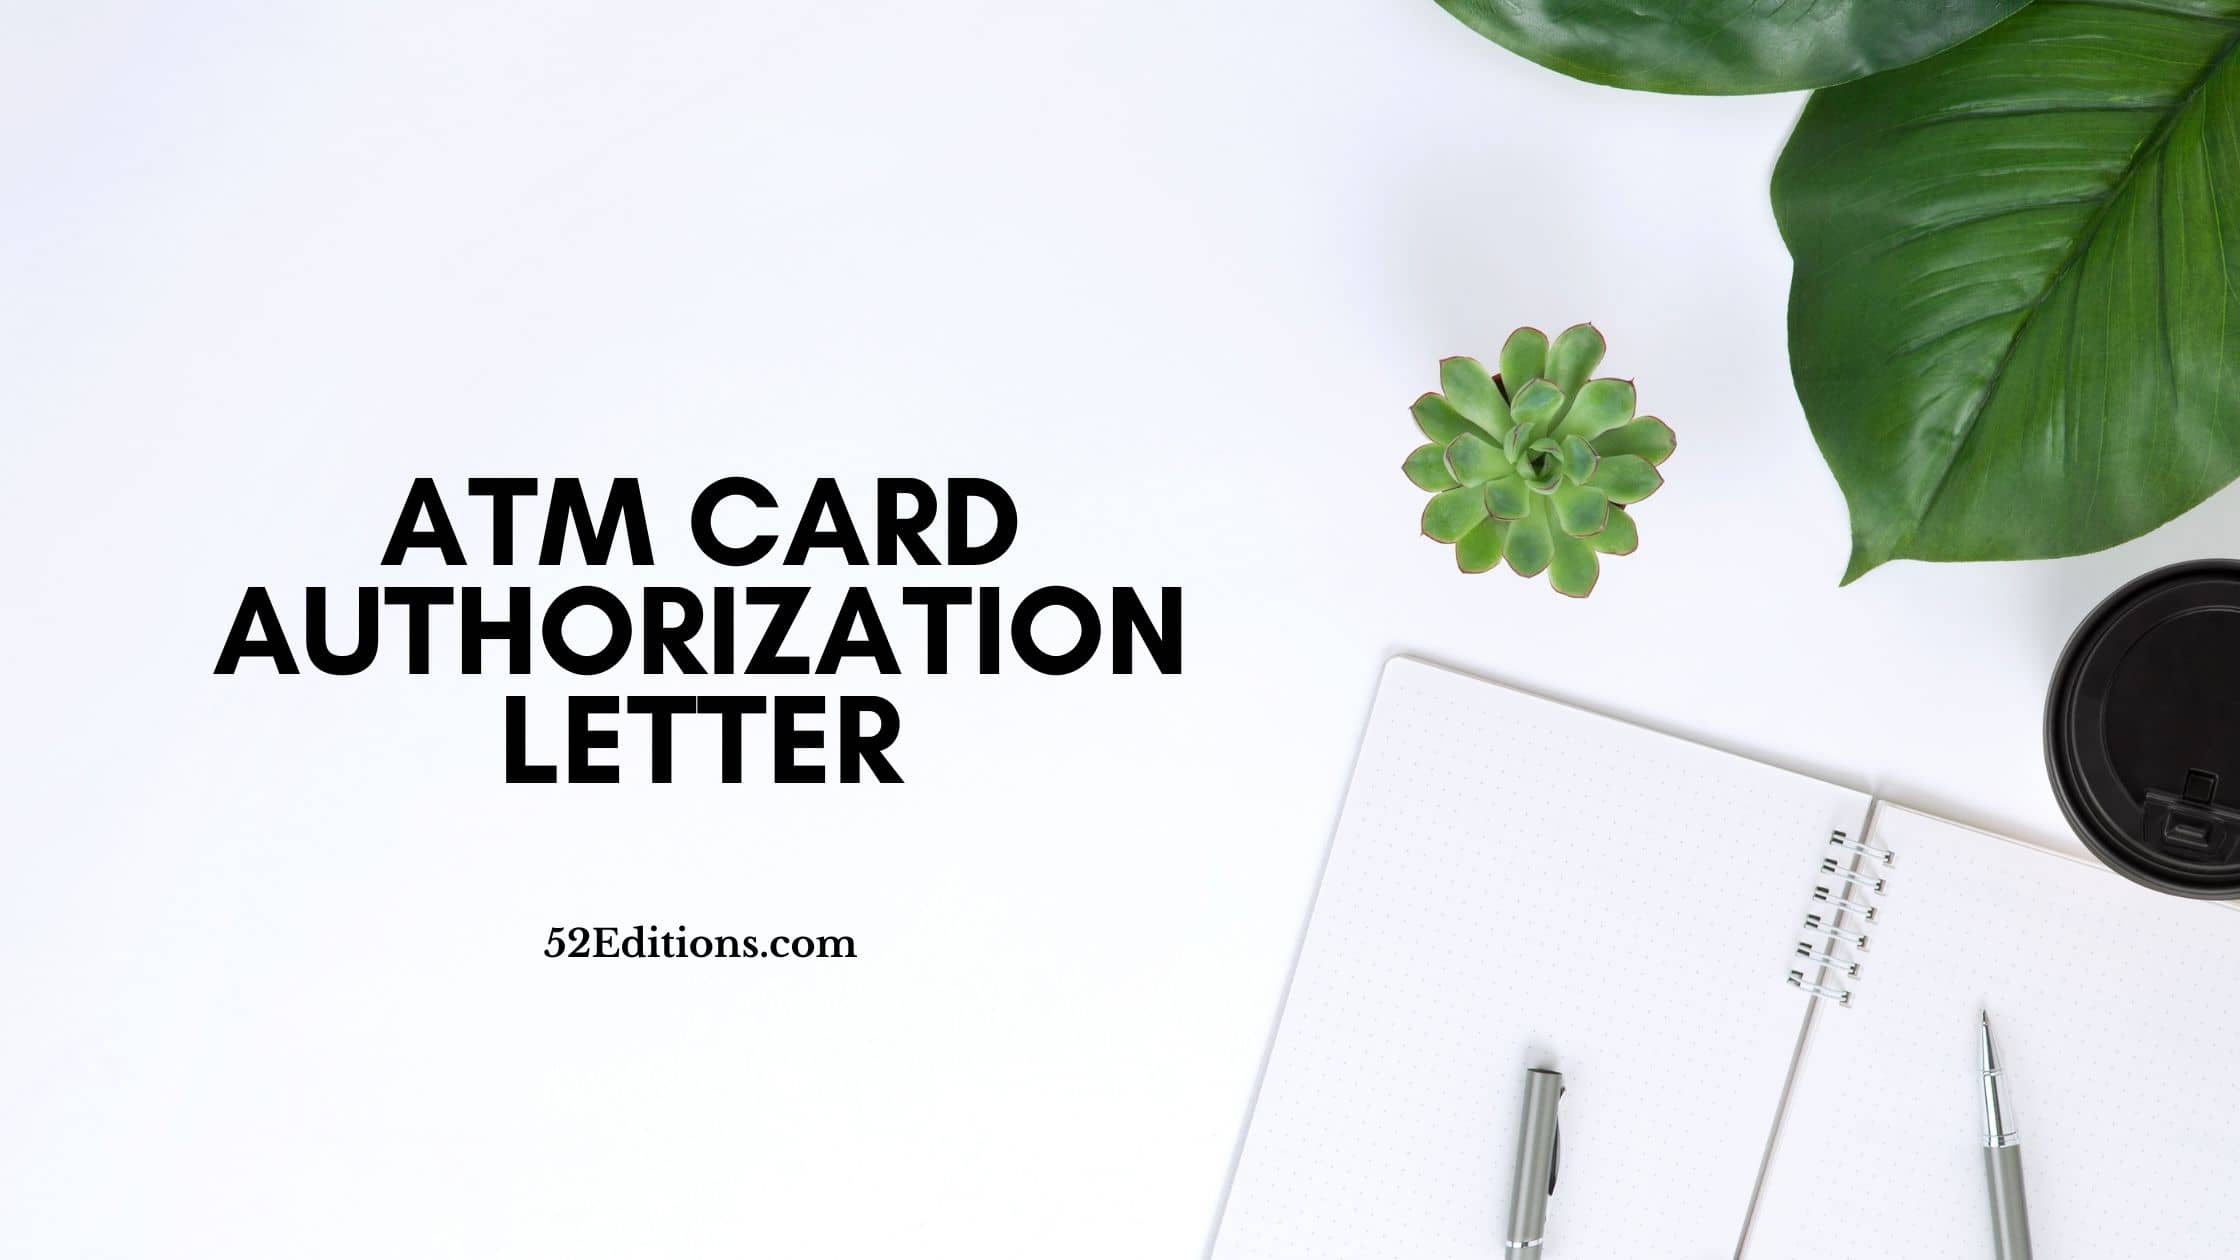 Atm Card Authorization Letter Get Free Letter Templates Print Or Download 0640